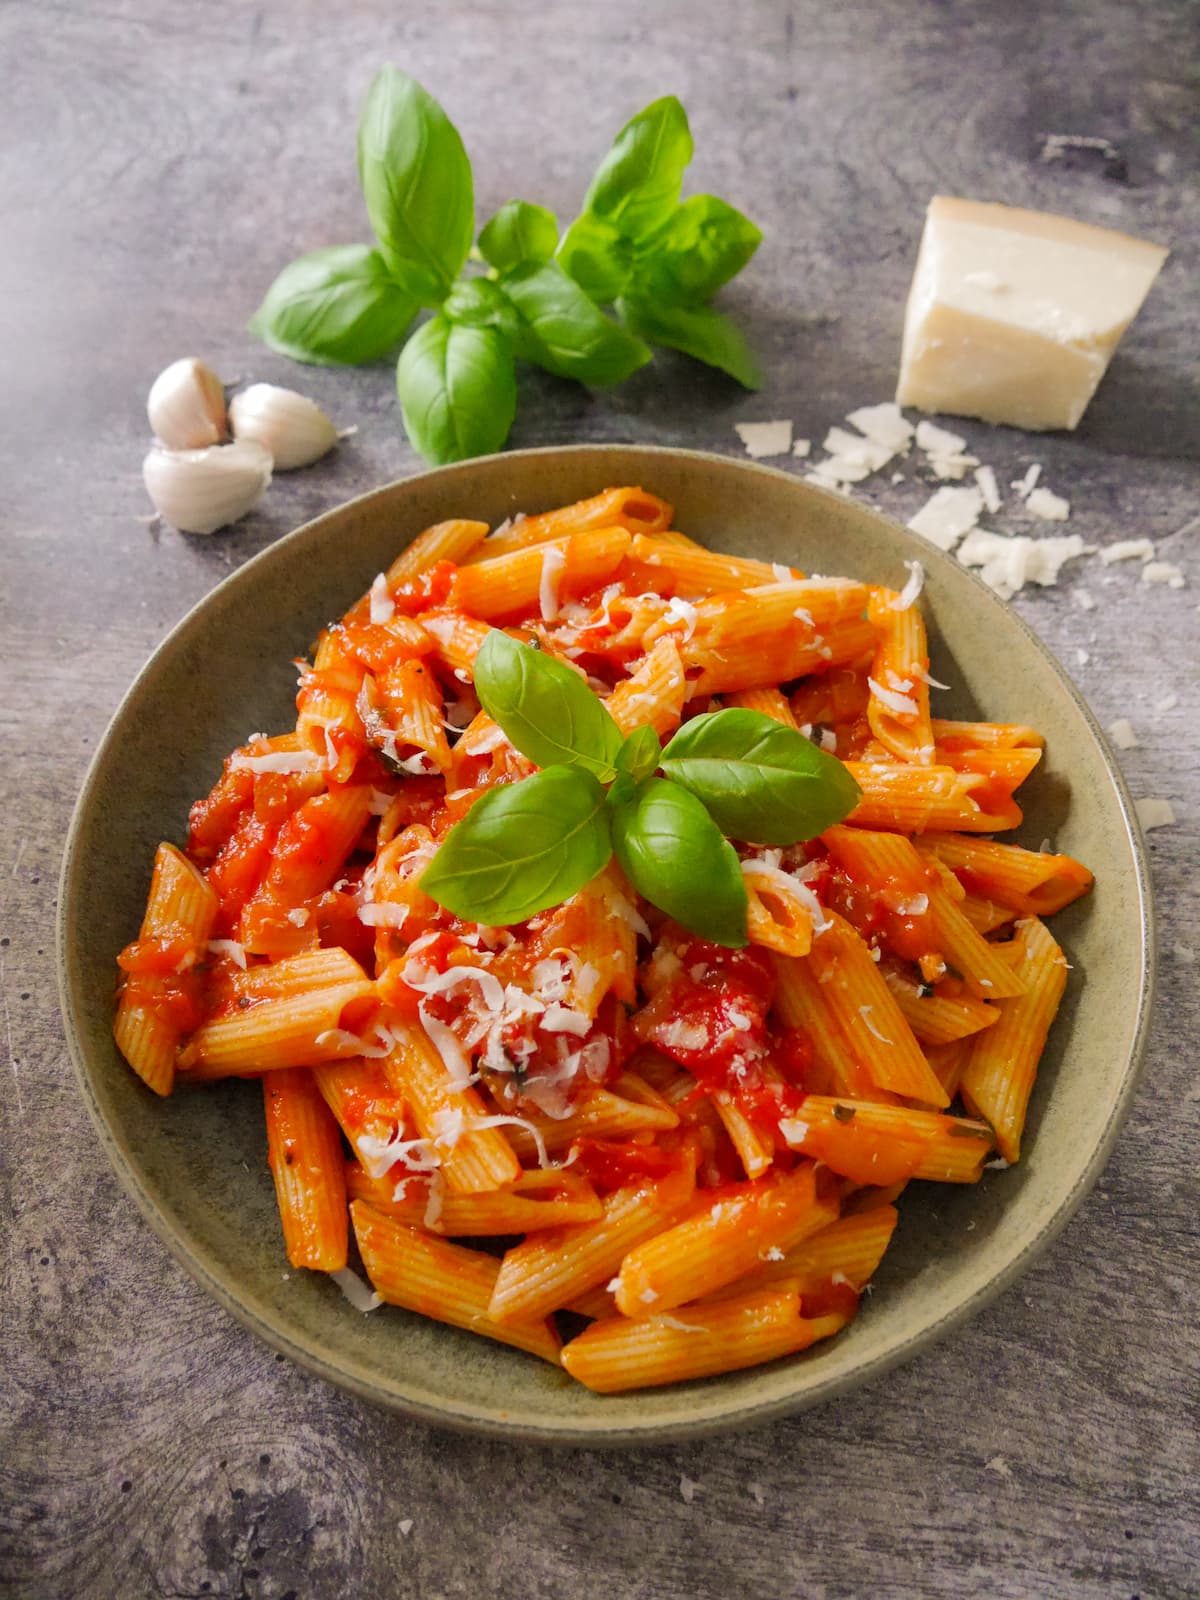 A green bowl filled with penne pasta in a tomato, basil pasta sauce with a garnish of parmesan cheese and fresh basil leaves, with a block of parmesan, fresh basil leaves and garlic set alongside.